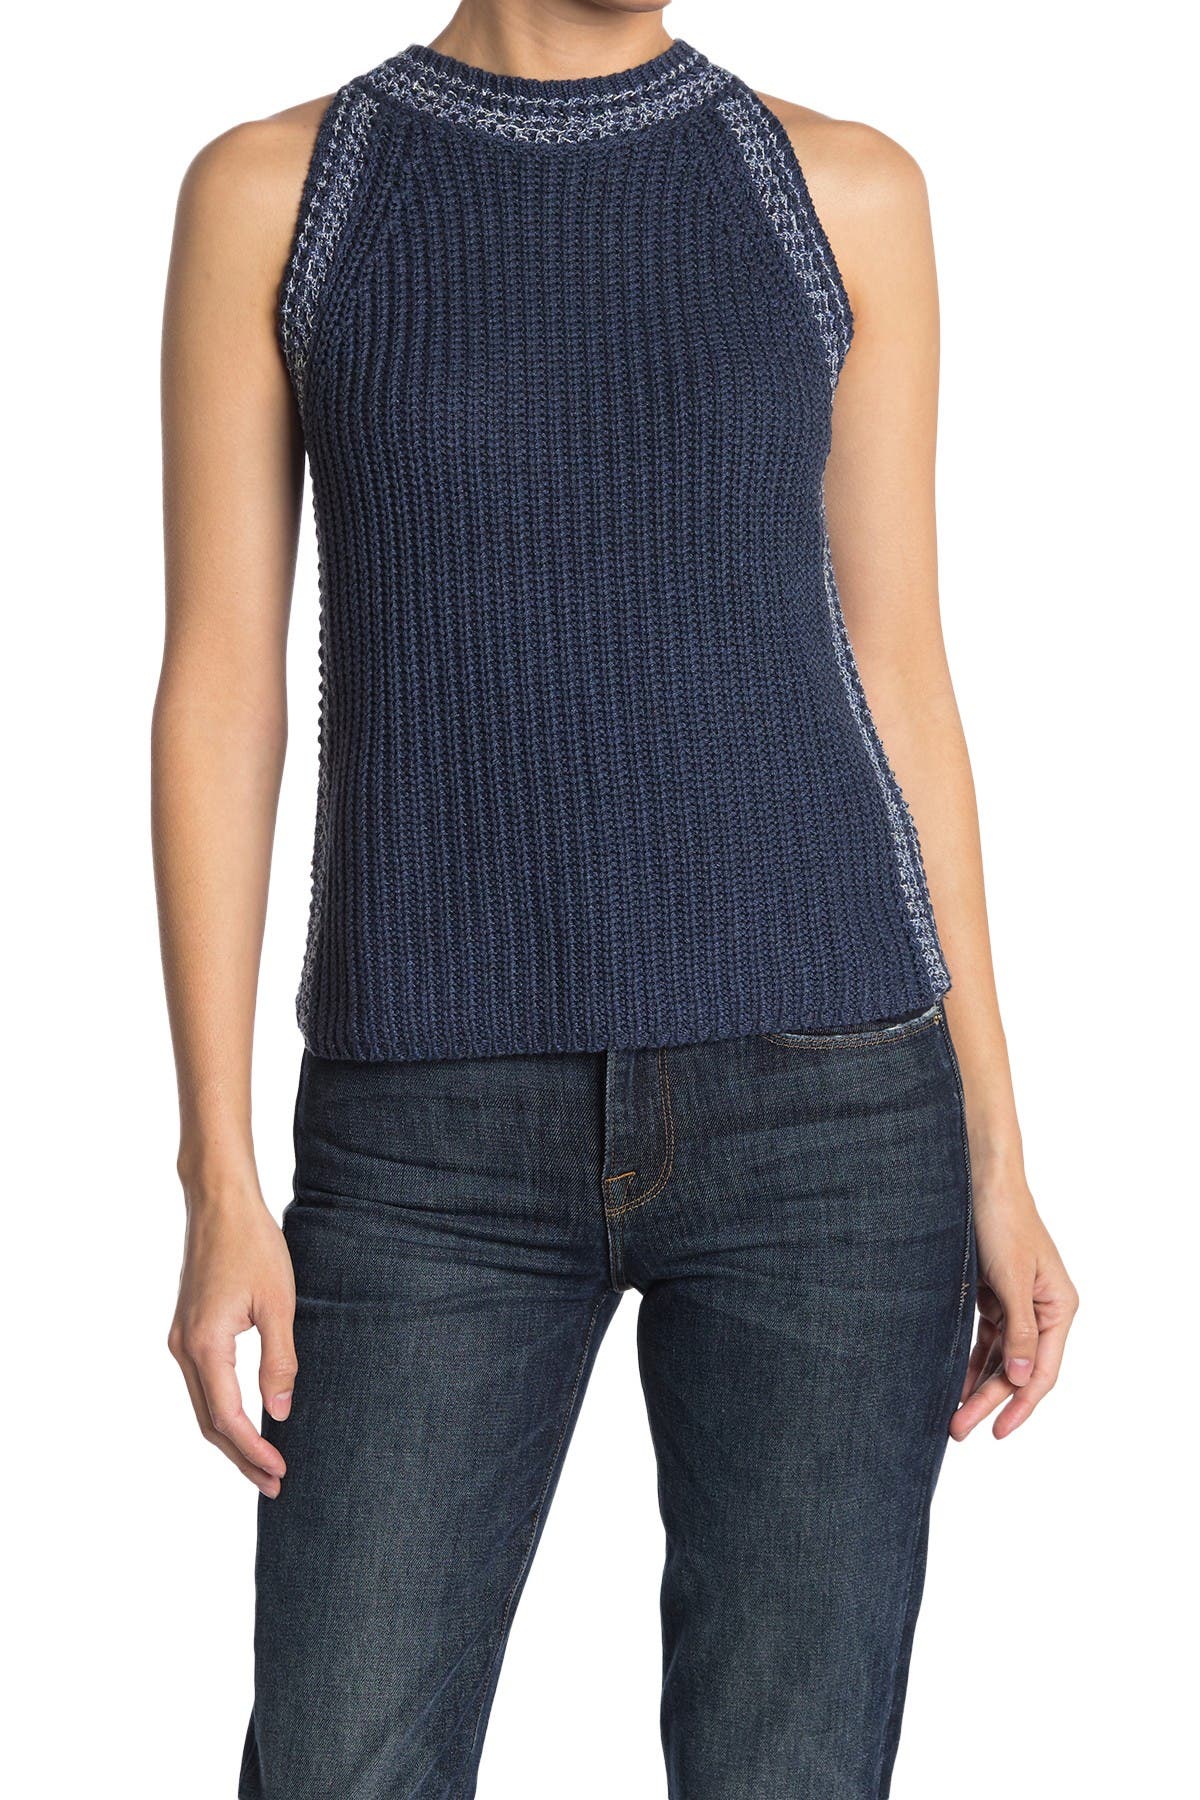 Autumn Cashmere Shaker Halter With Marled Ribs In Medium Blue6